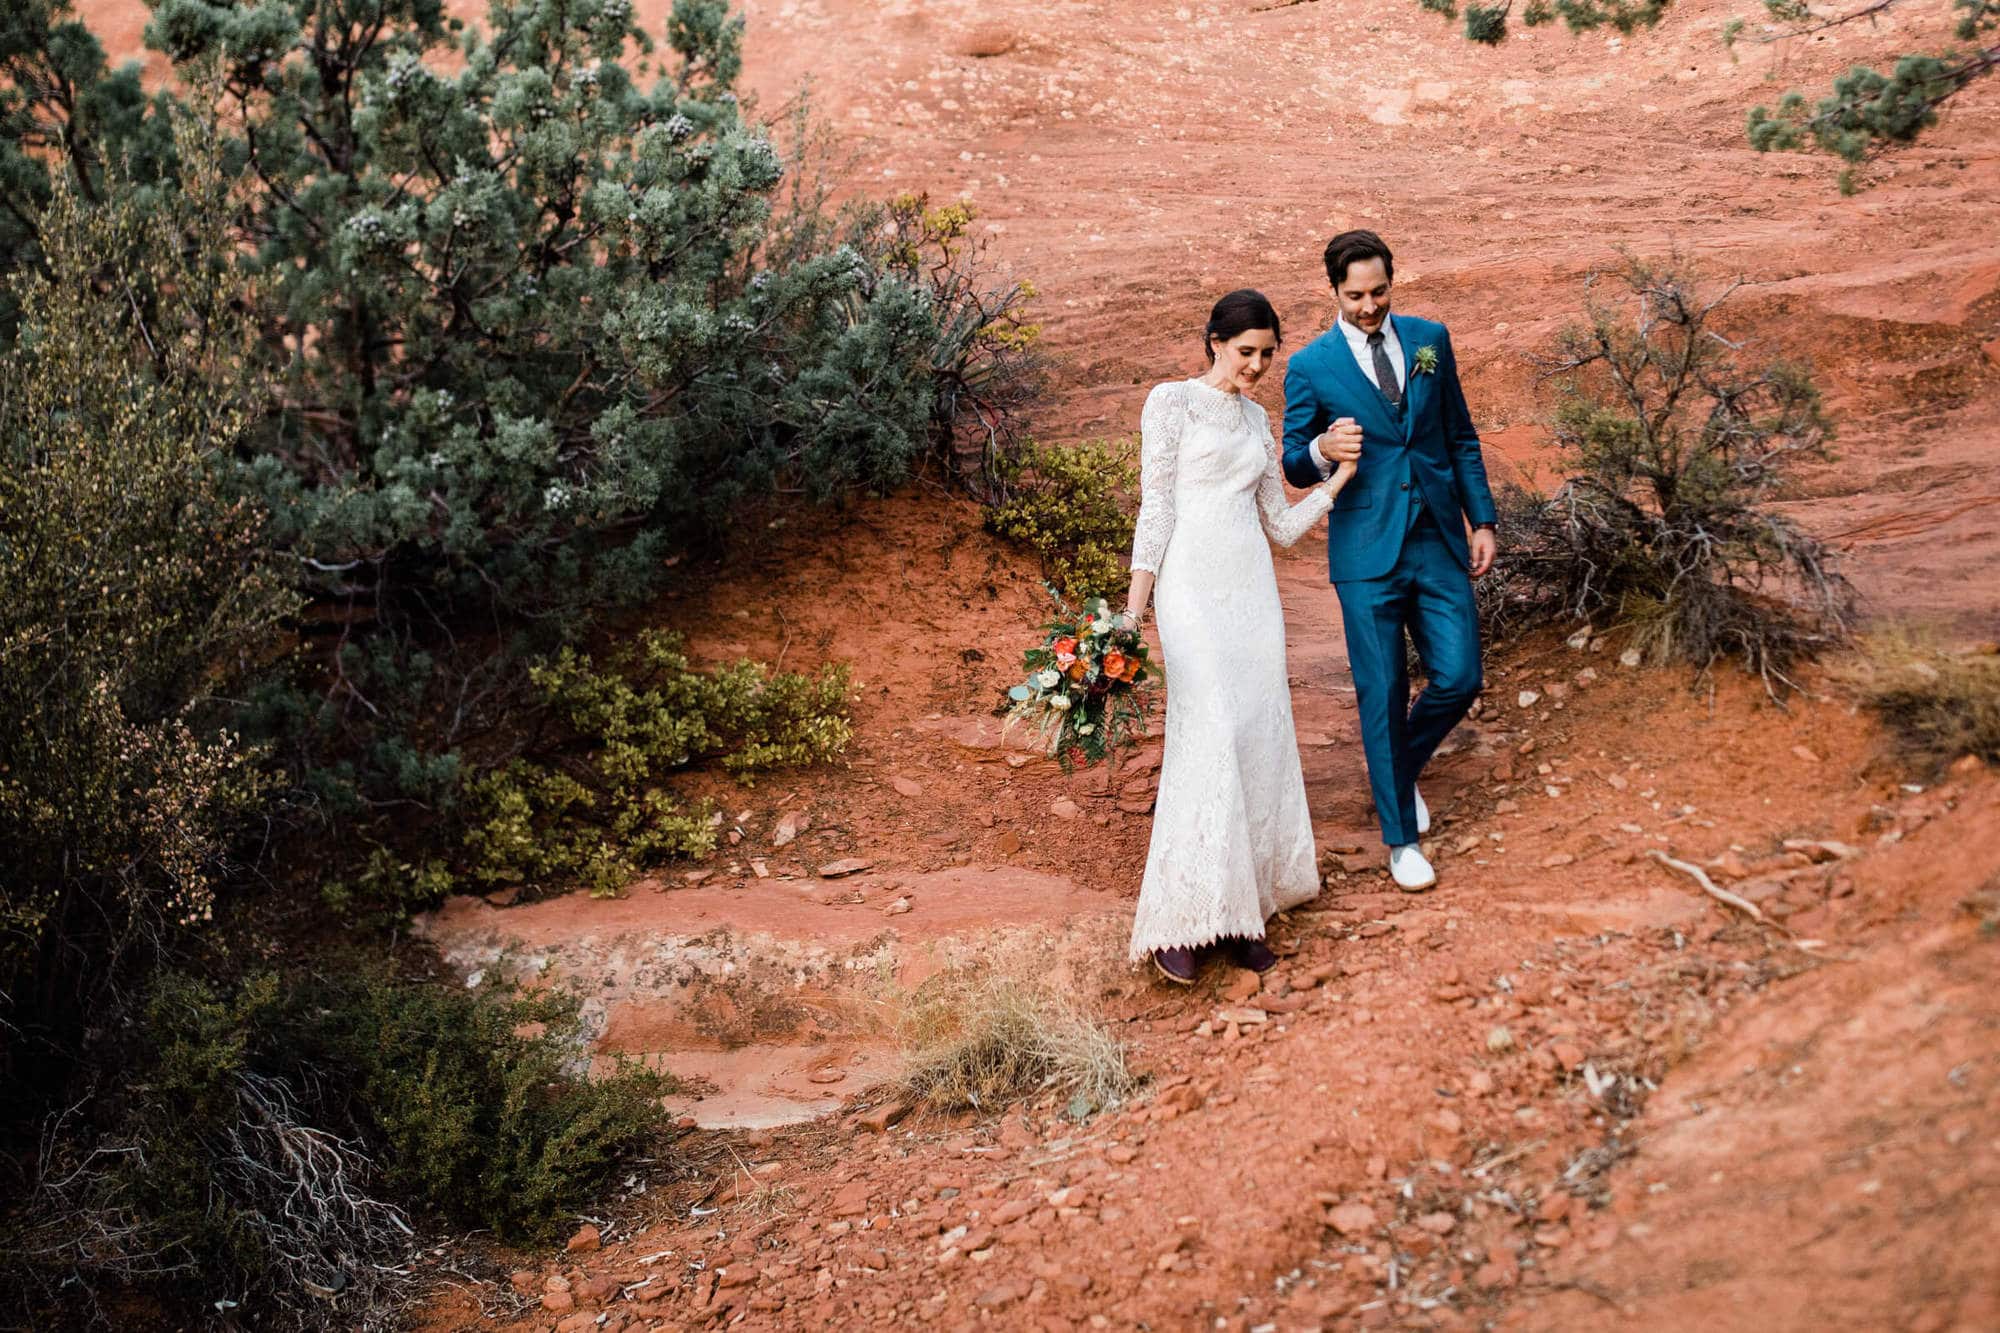 This Sedona adventure elopement was epic! Katy and Clay had the ultimate elopement day adventure jeeping to their wedding spot and dancing the night away!